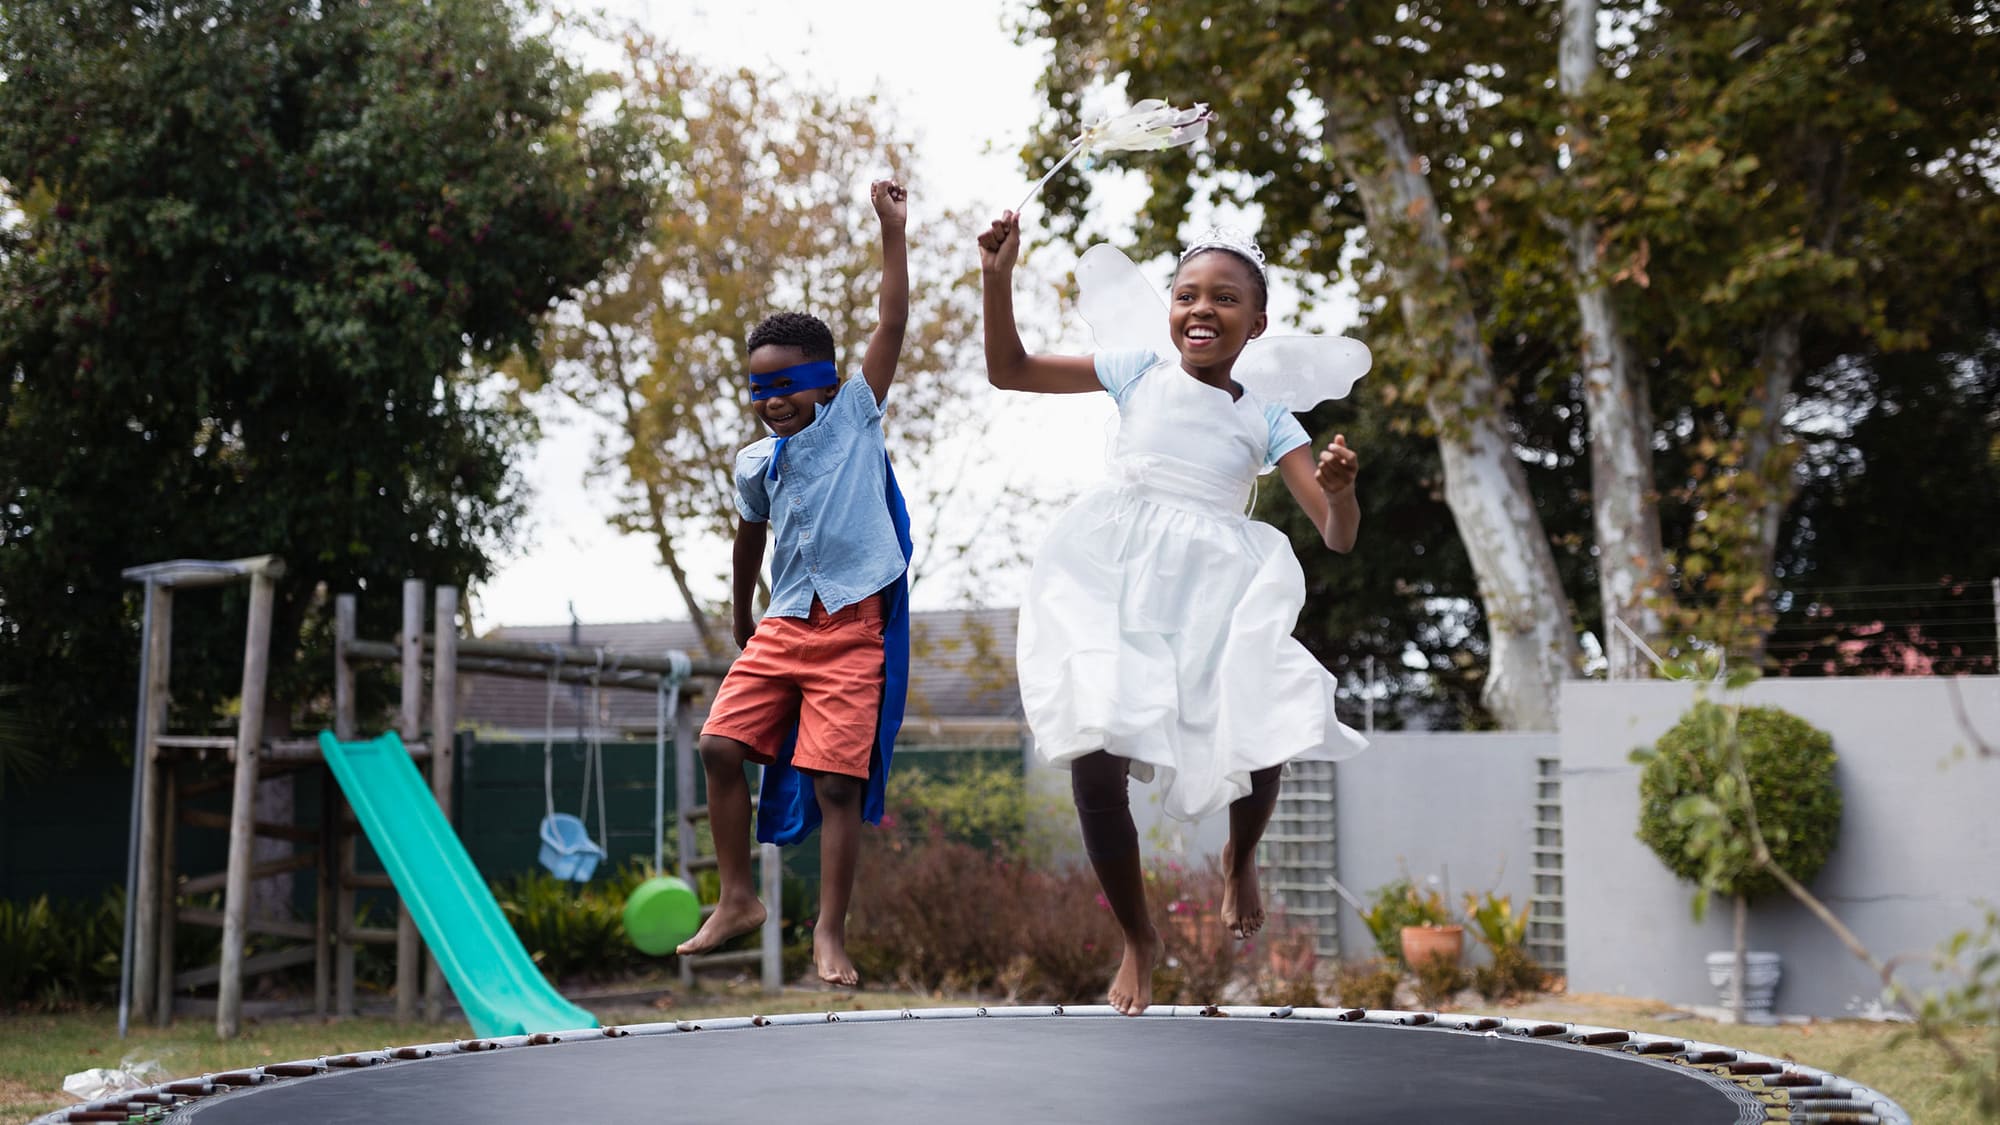 Kids jumping on a trampoline in the backyard of a residence.